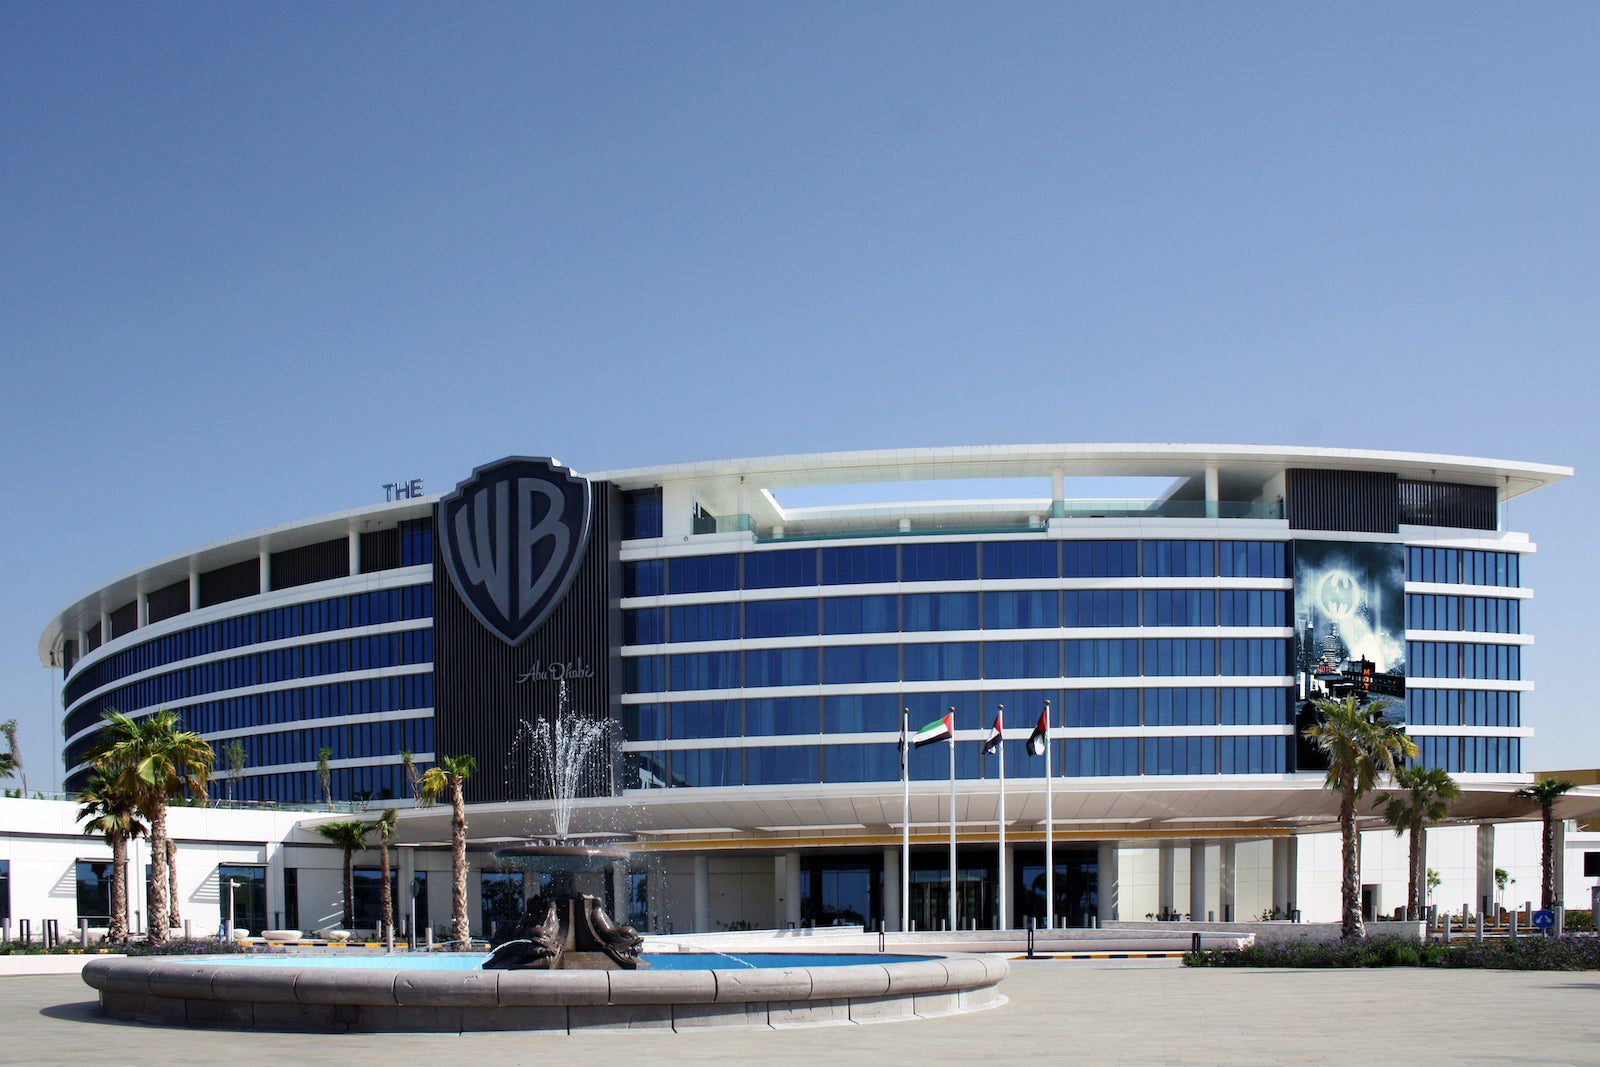 exterior of WB hotel